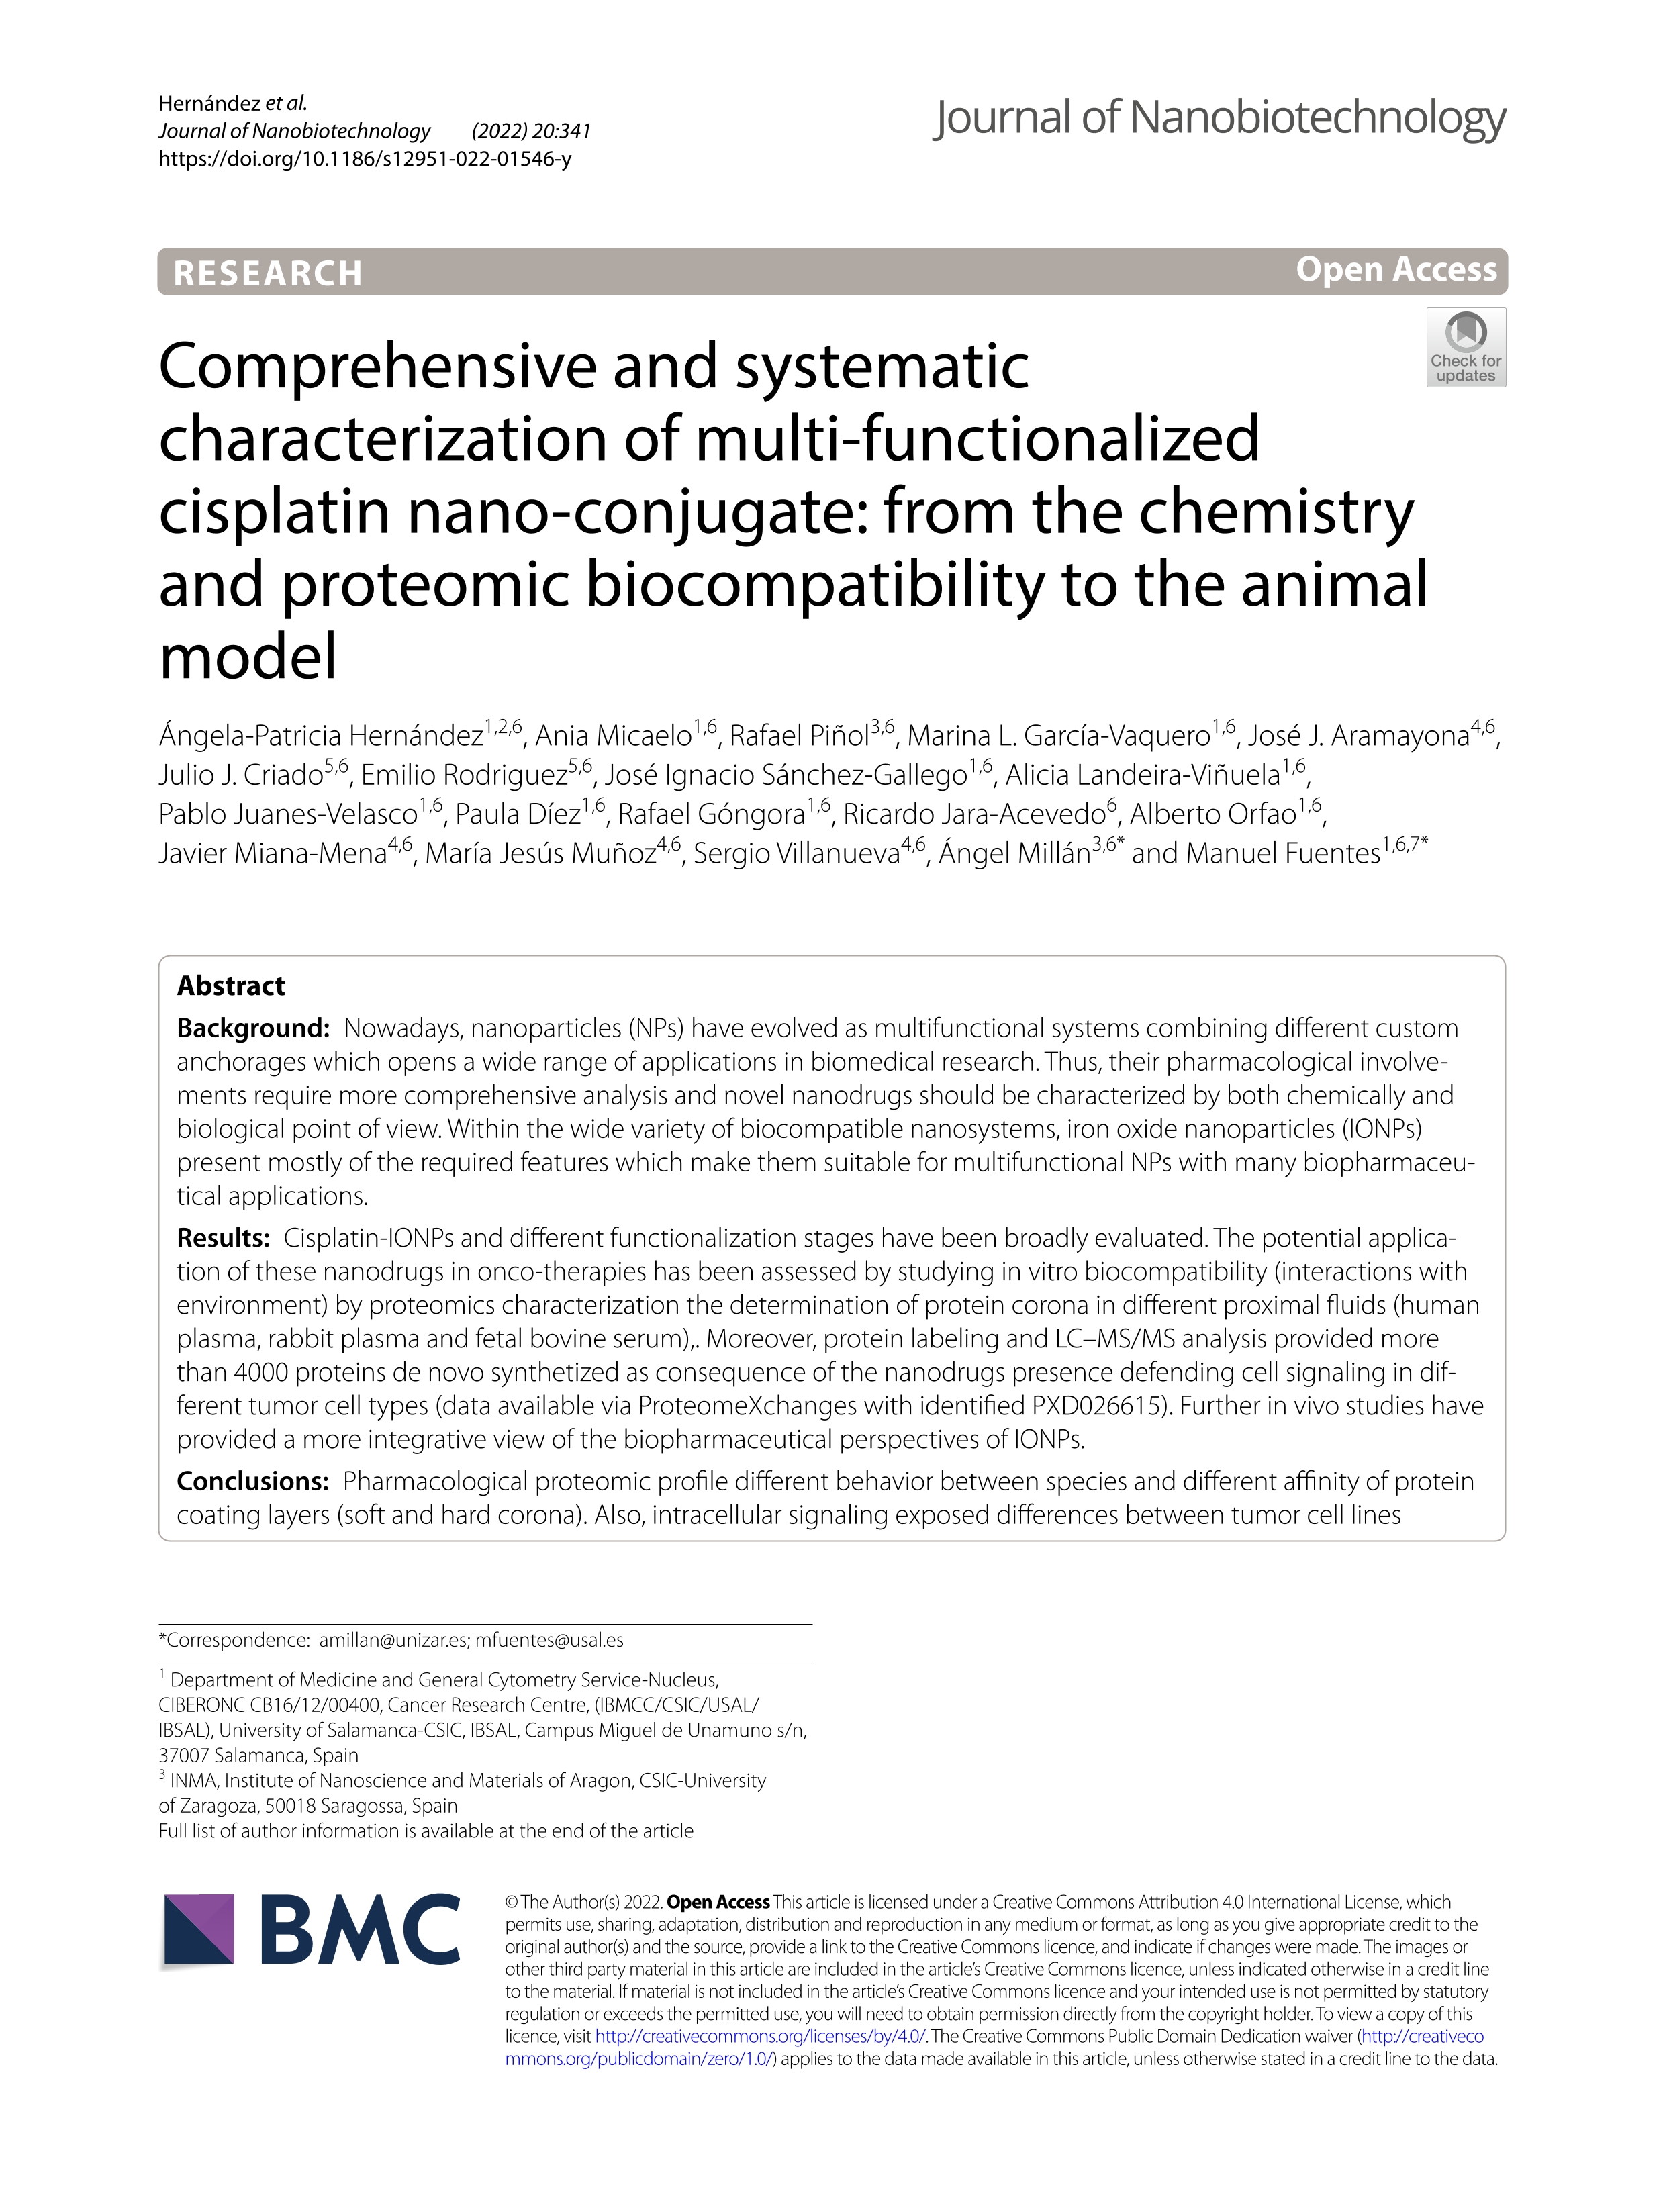 Comprehensive and systematic characterization of multi-functionalized cisplatin nano-conjugate: from the chemistry and proteomic biocompatibility to the animal model